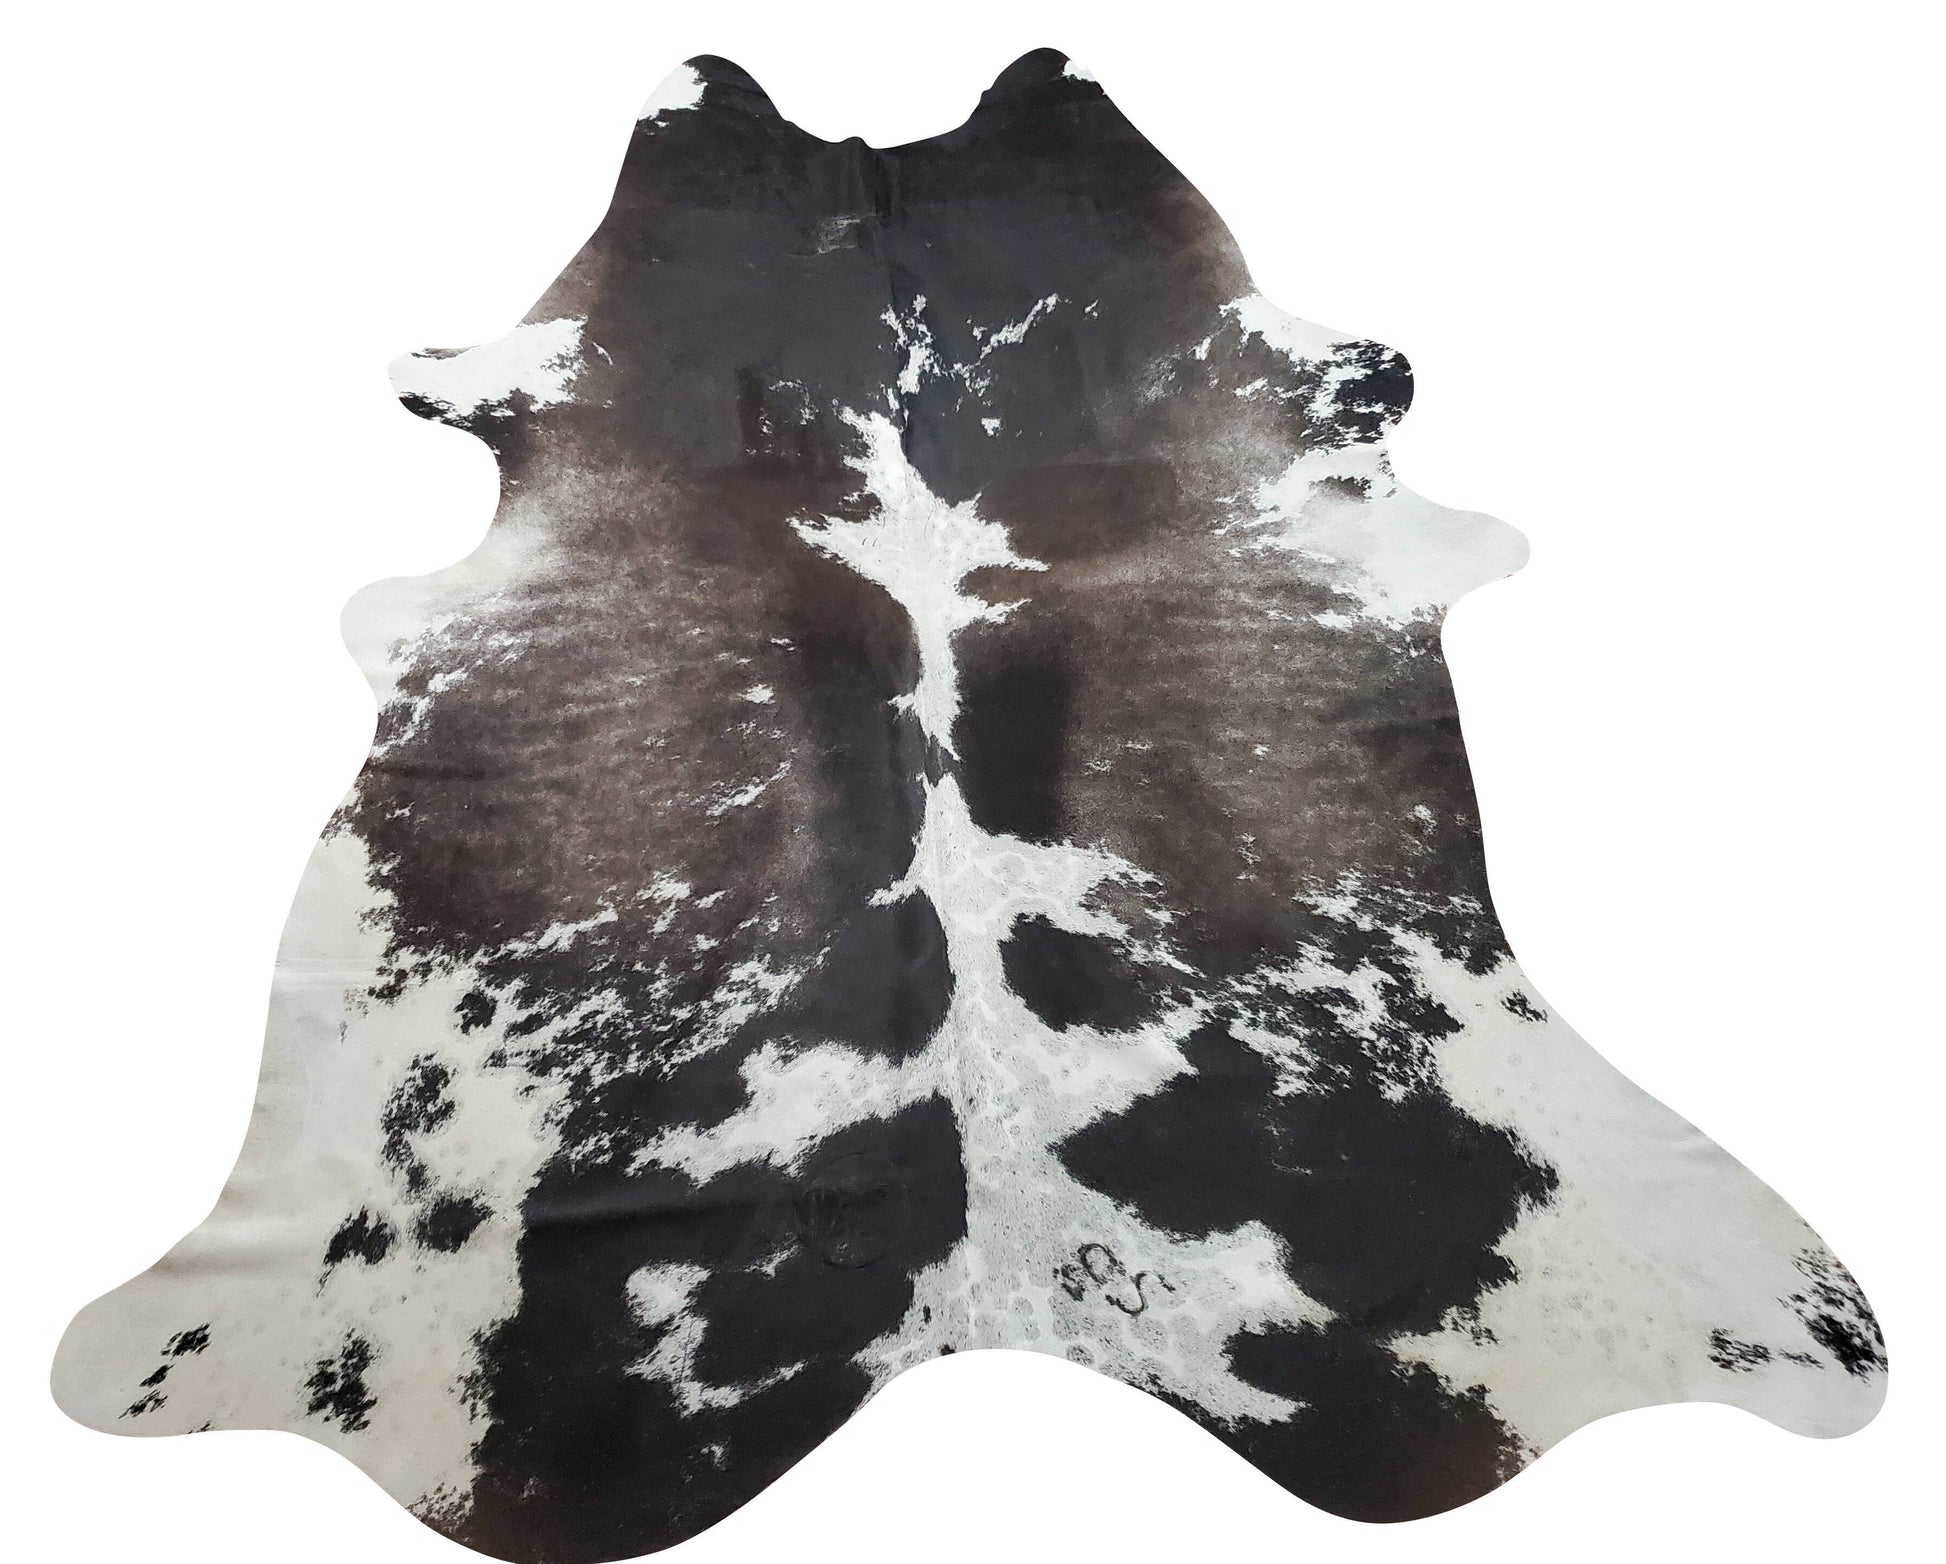 With this white and grey cowhide rug, you can uplift the entire look of the space, a final impression with this cowhide will be a beautiful contrast.